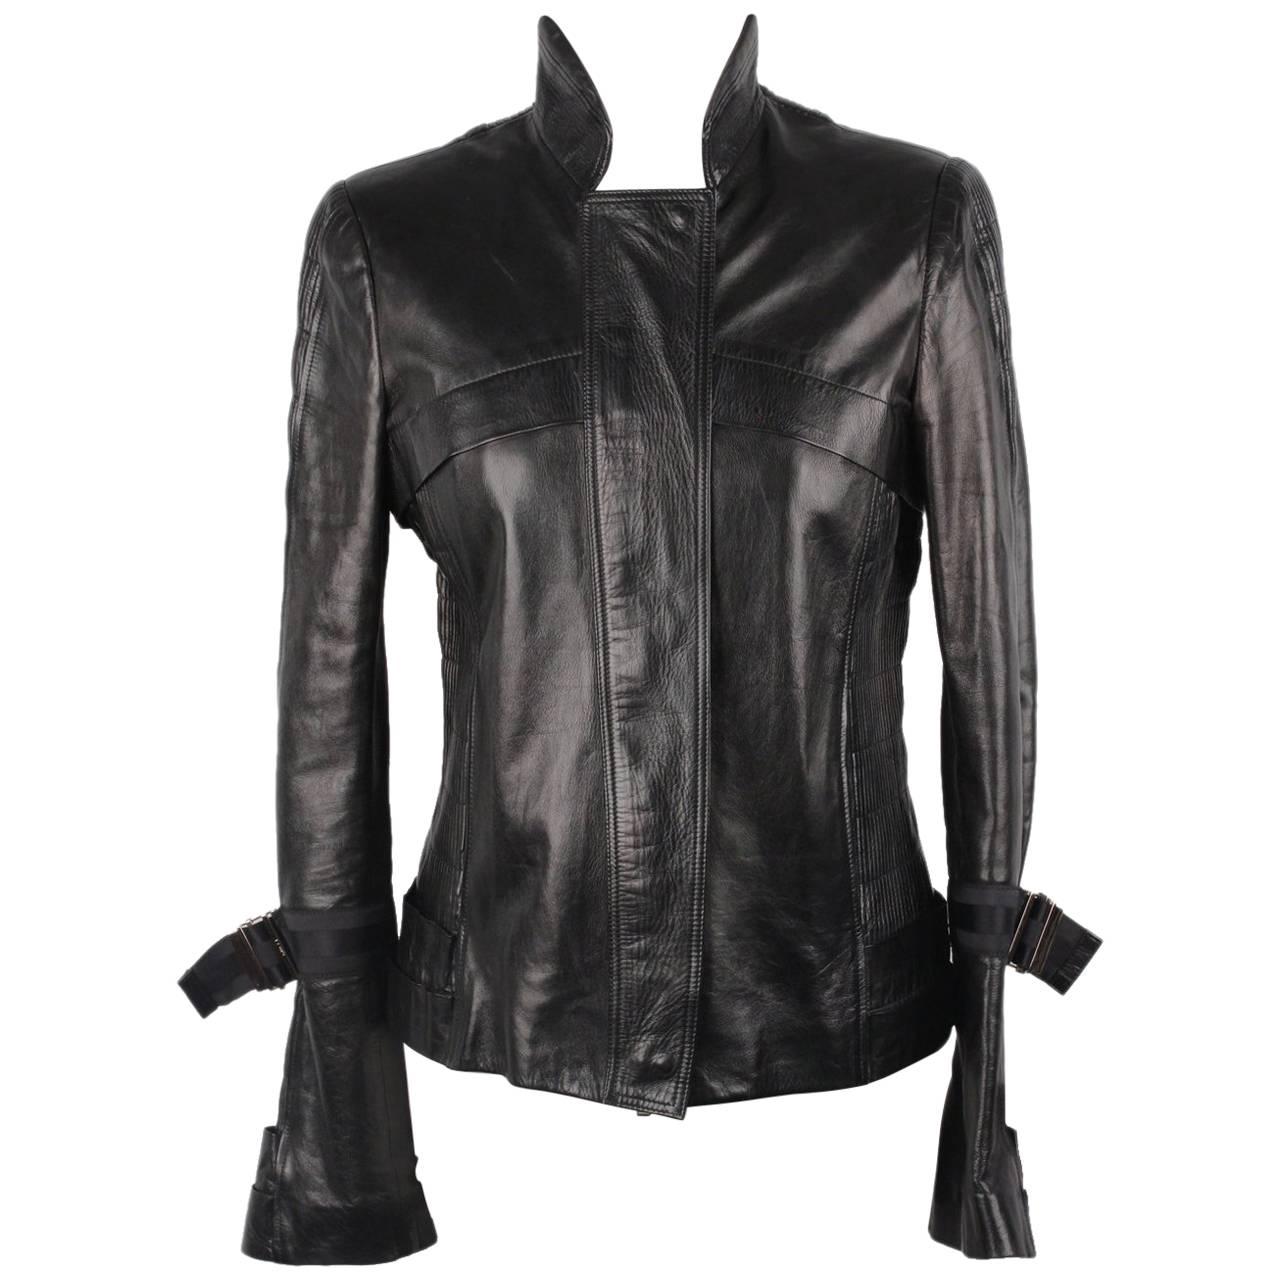 GUCCI Black Leather BIKER JACKET with Pintucked Panels